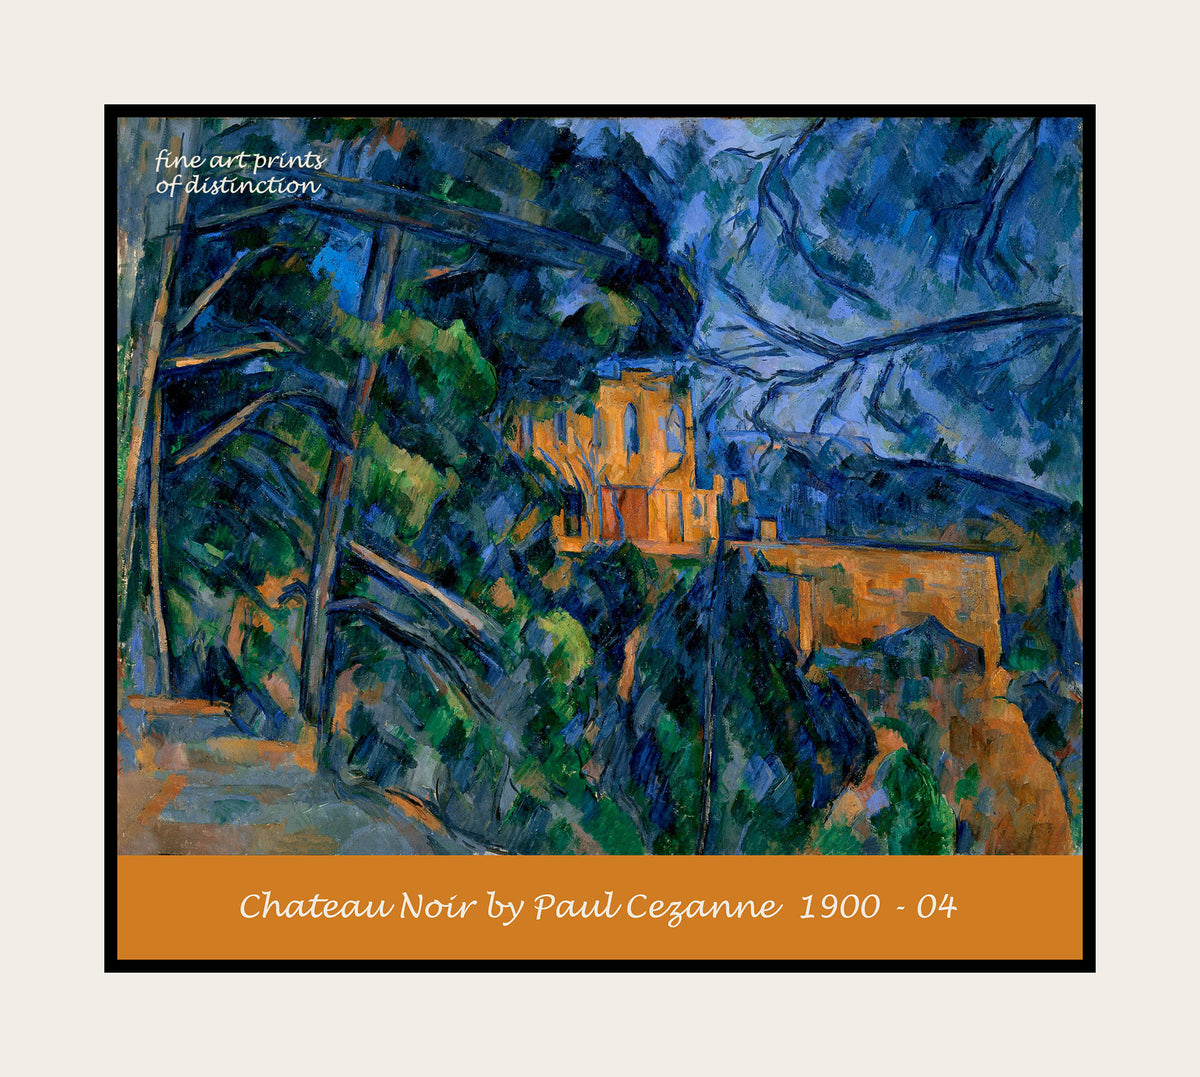 An archival premium Quality Poster of Chateau Noir painted by Impressionist artist Paul Cezanne between 1900 - 04 for sale by Brandywine General Store